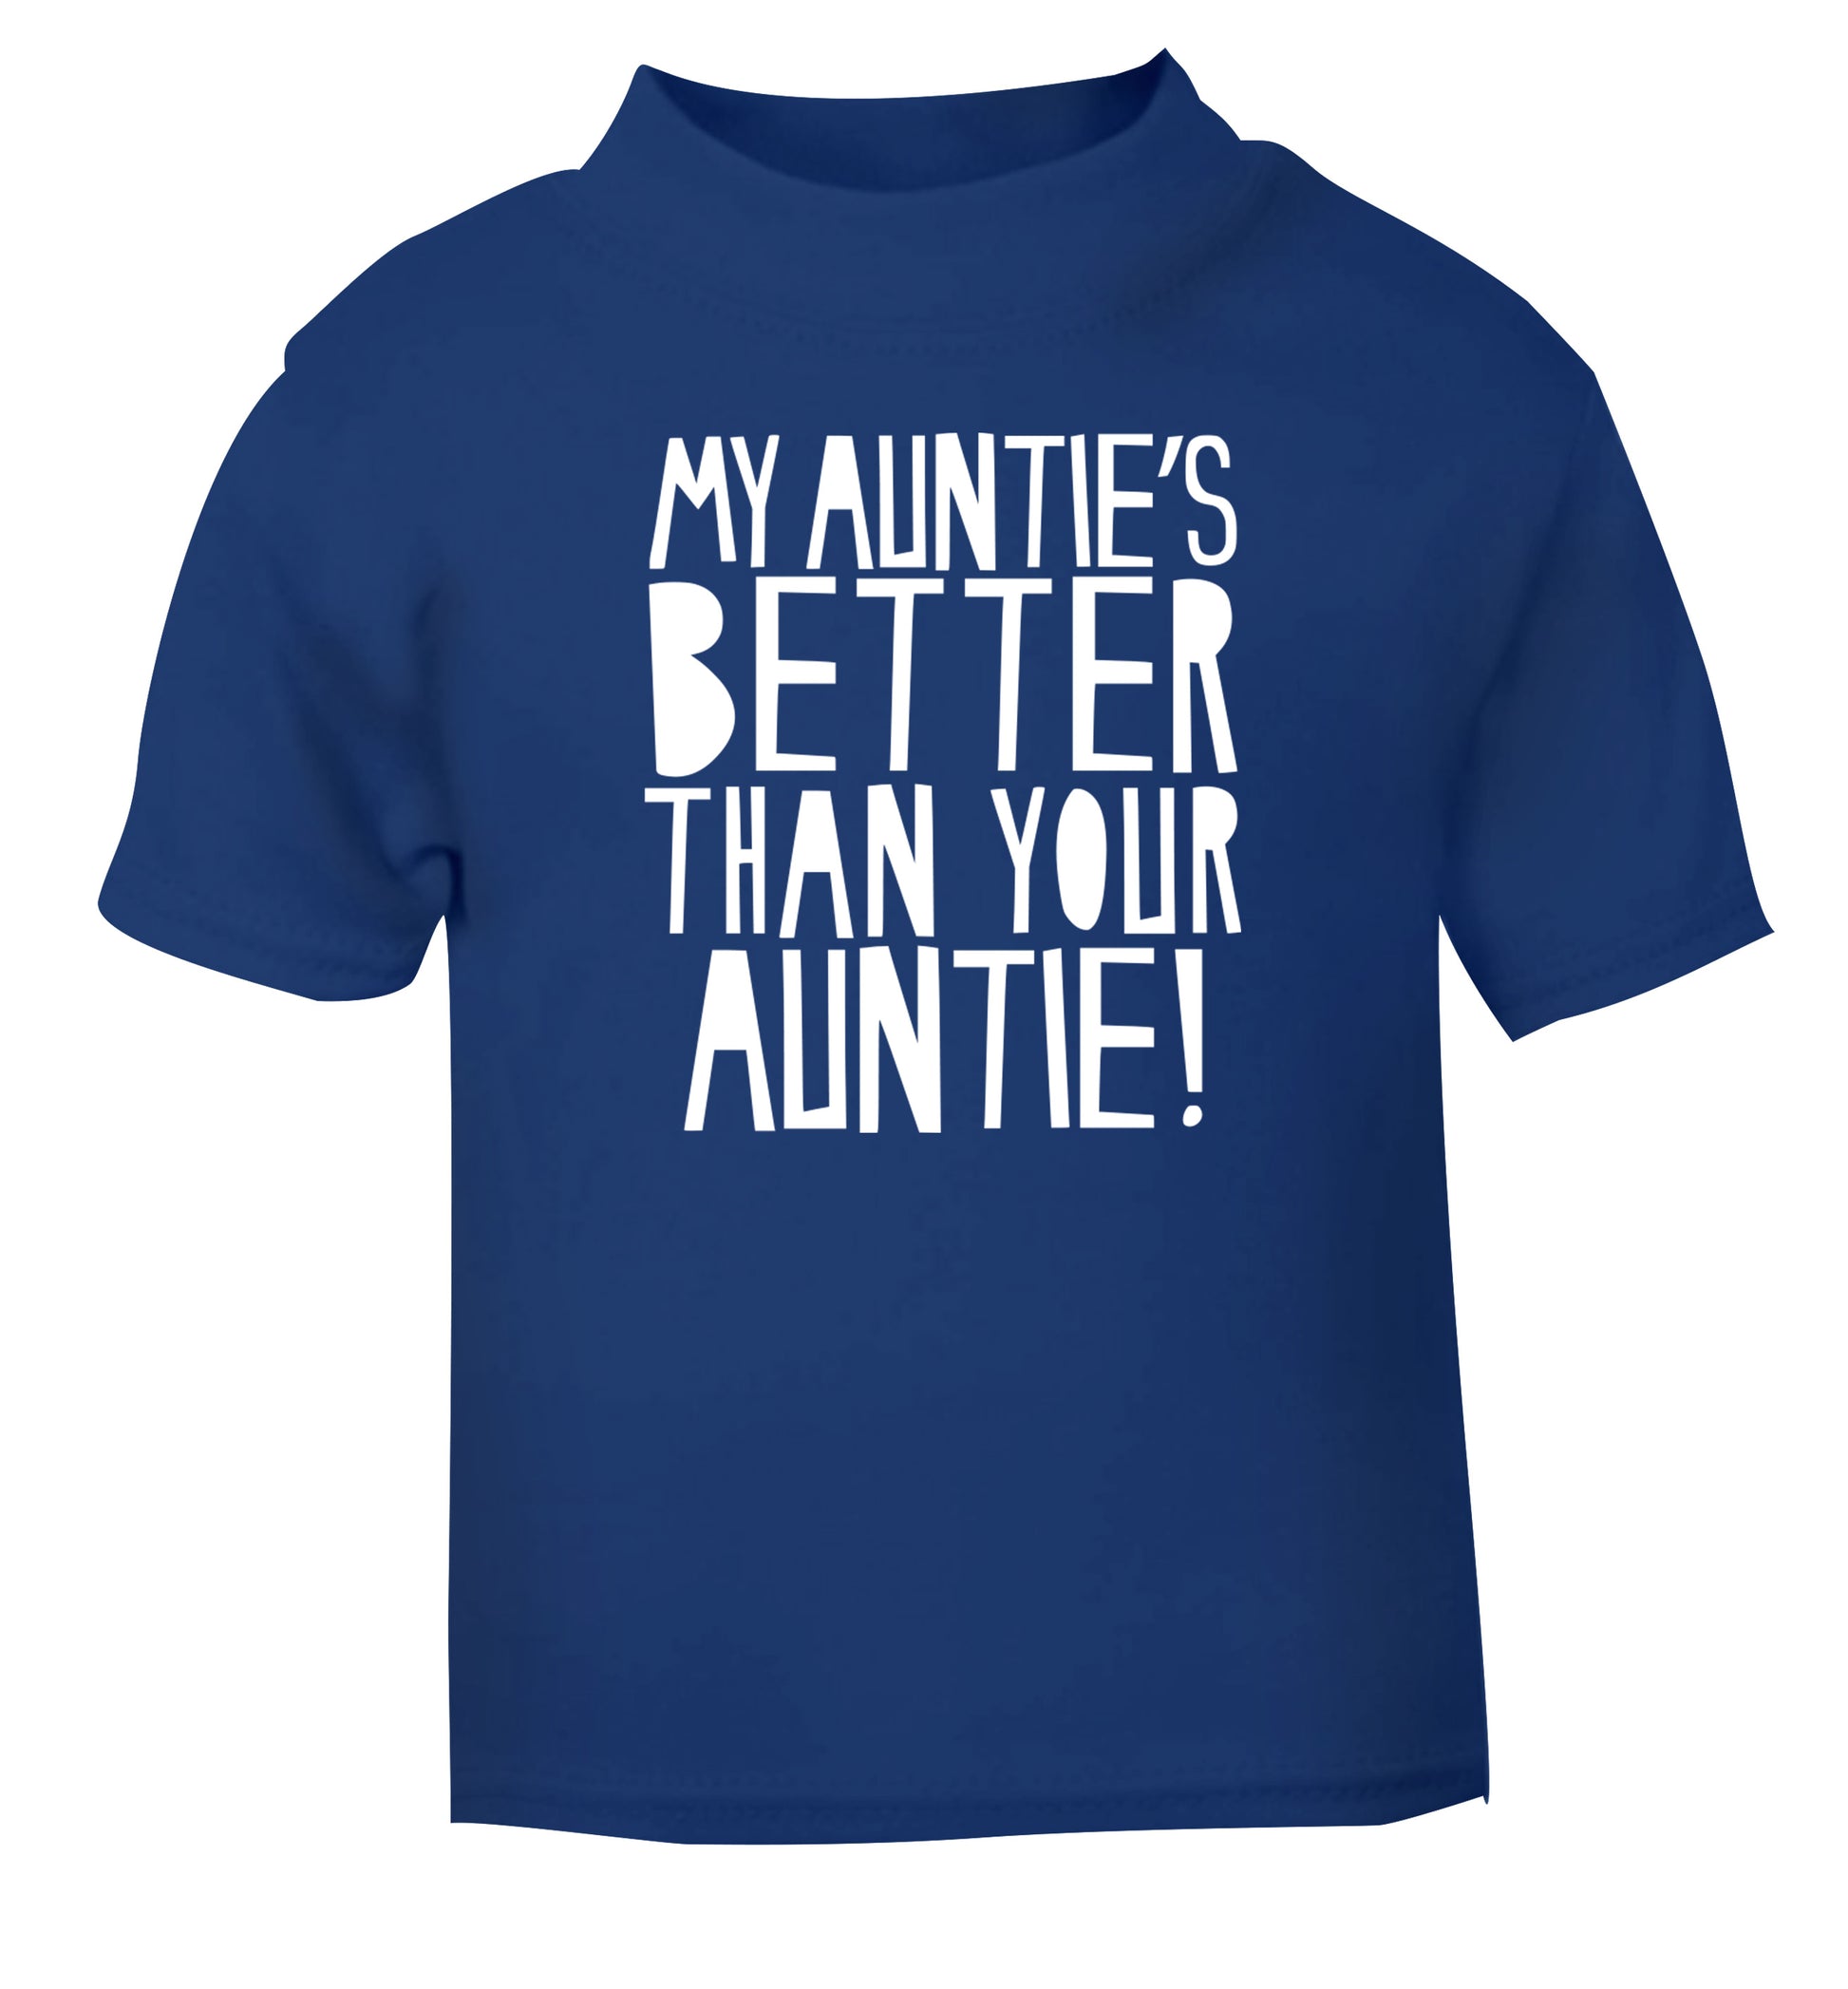 My auntie's better than your auntie blue Baby Toddler Tshirt 2 Years